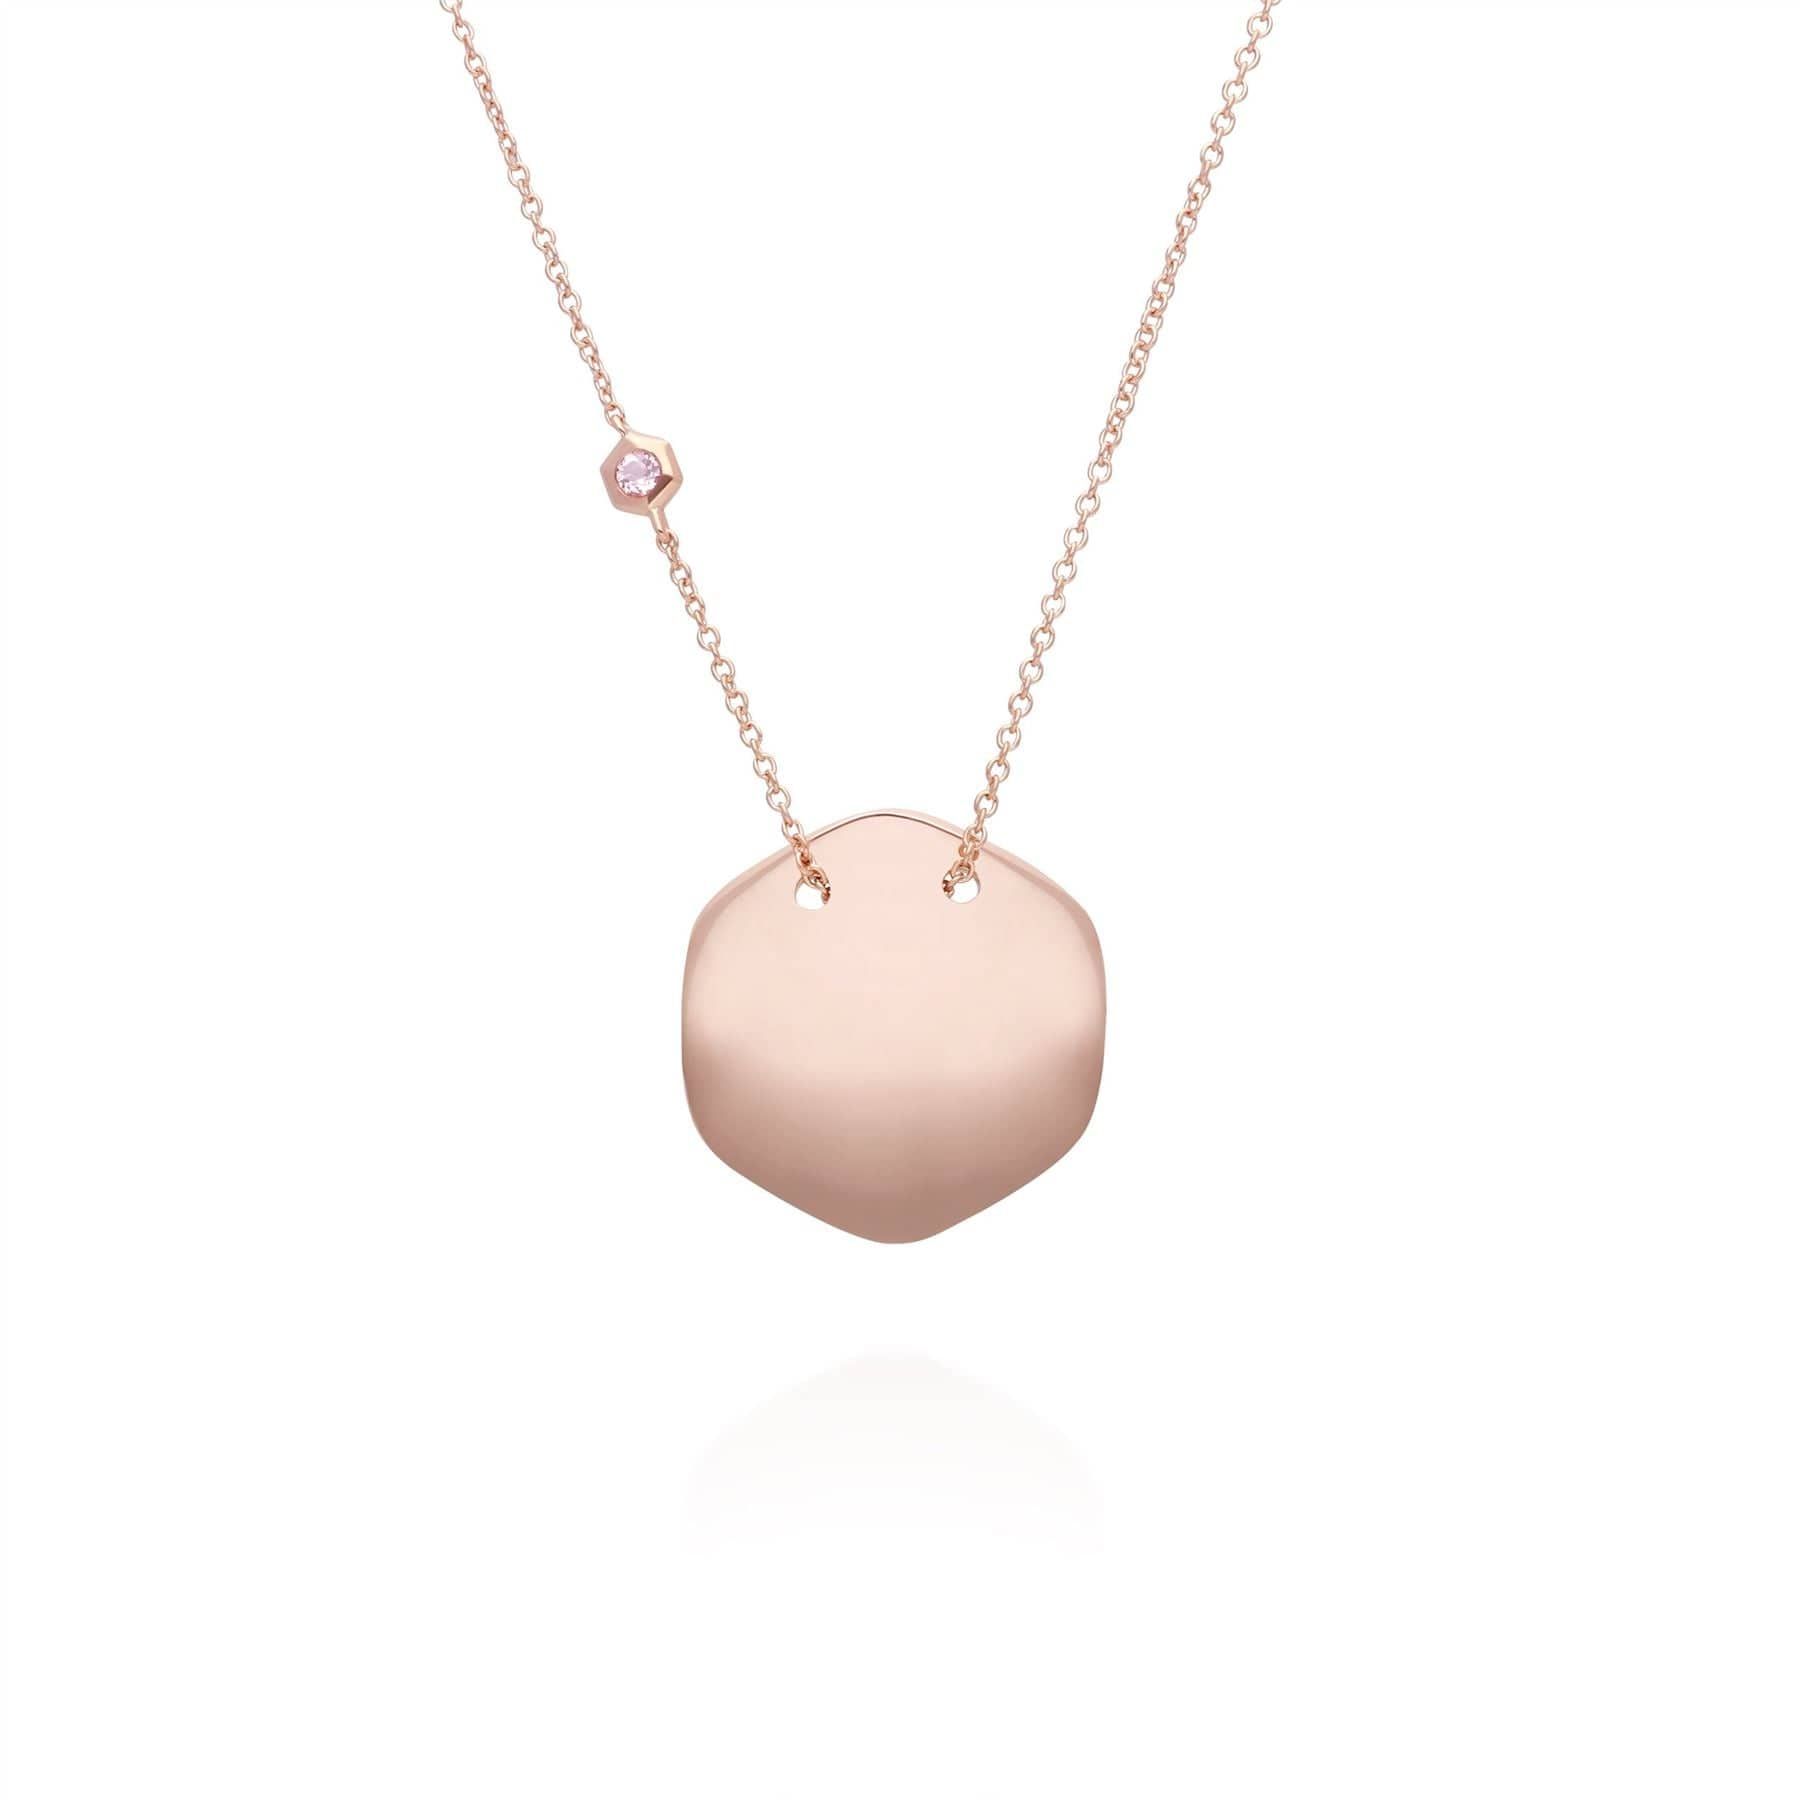 Morganite Engravable Necklace in Rose Gold Plated Sterling Silver - Gemondo